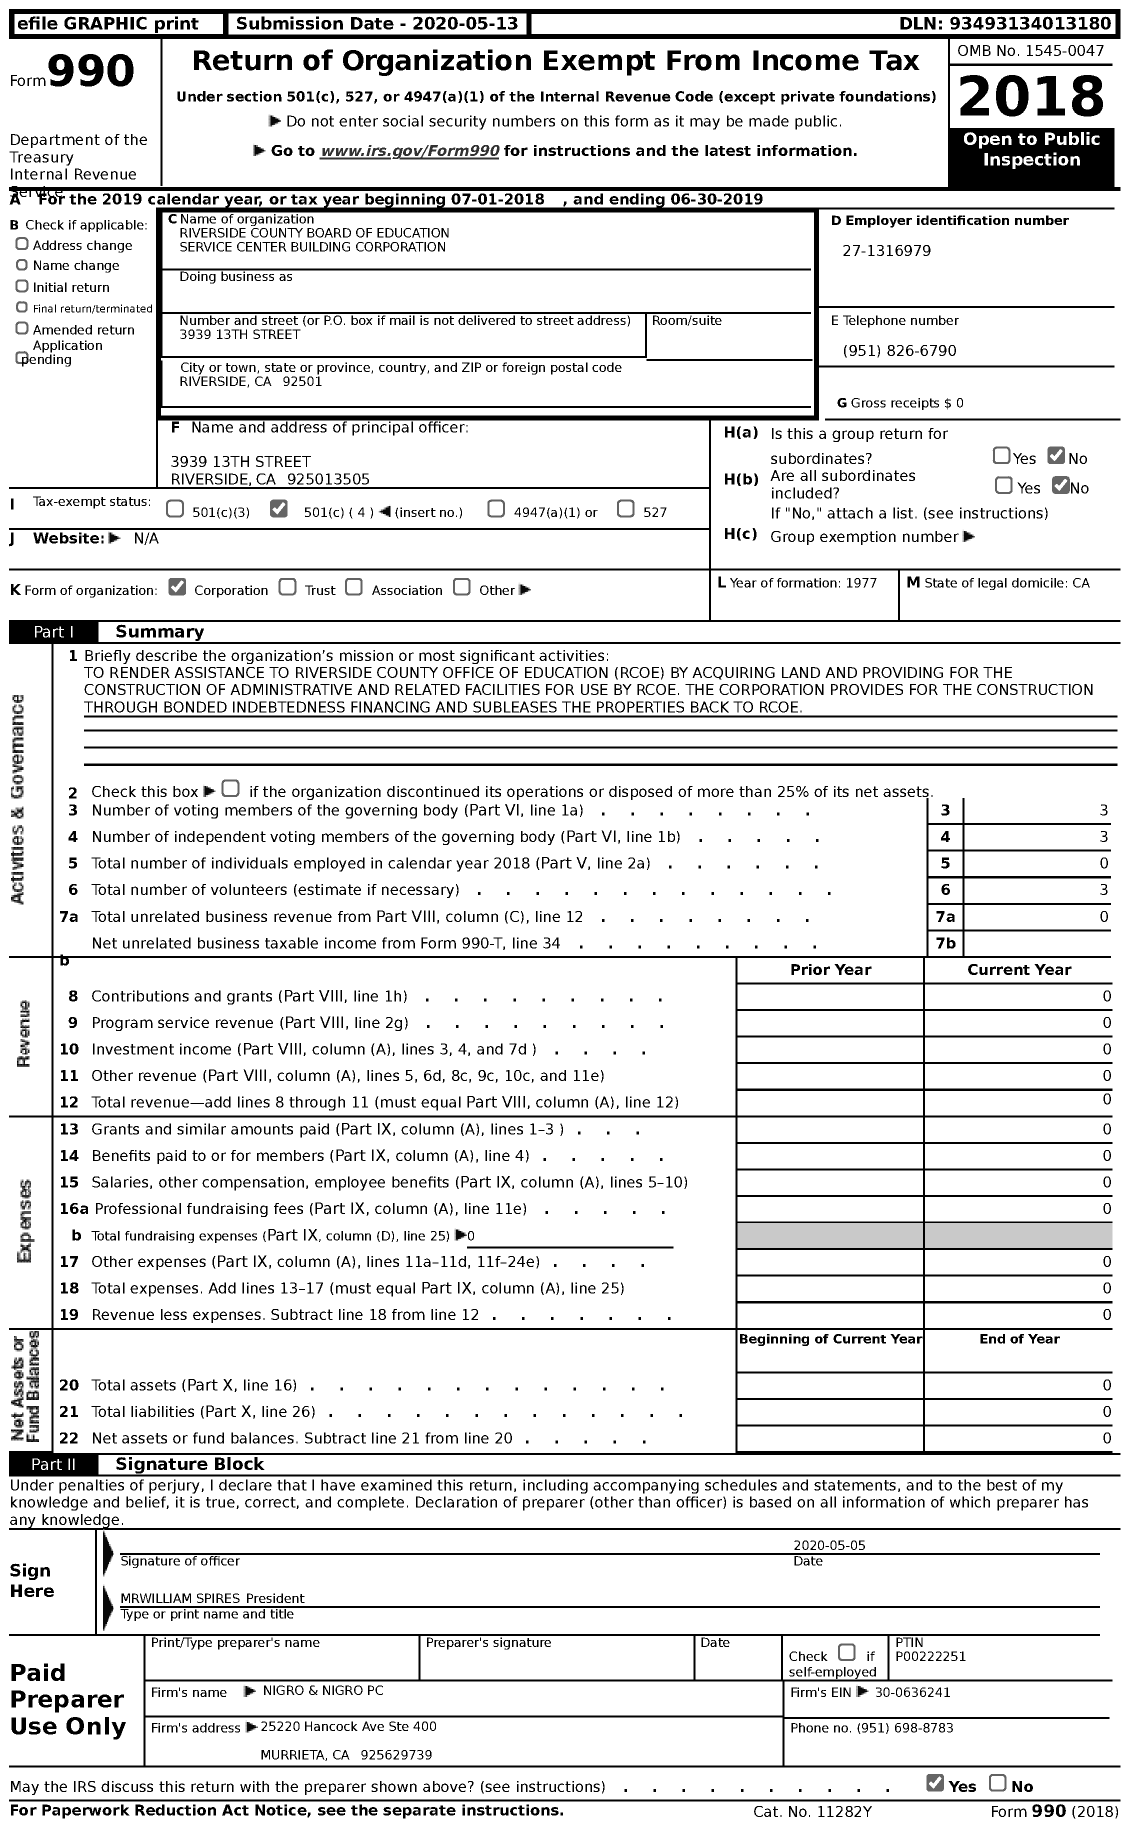 Image of first page of 2018 Form 990 for Riverside County Board of Education Service Center Building Corporation